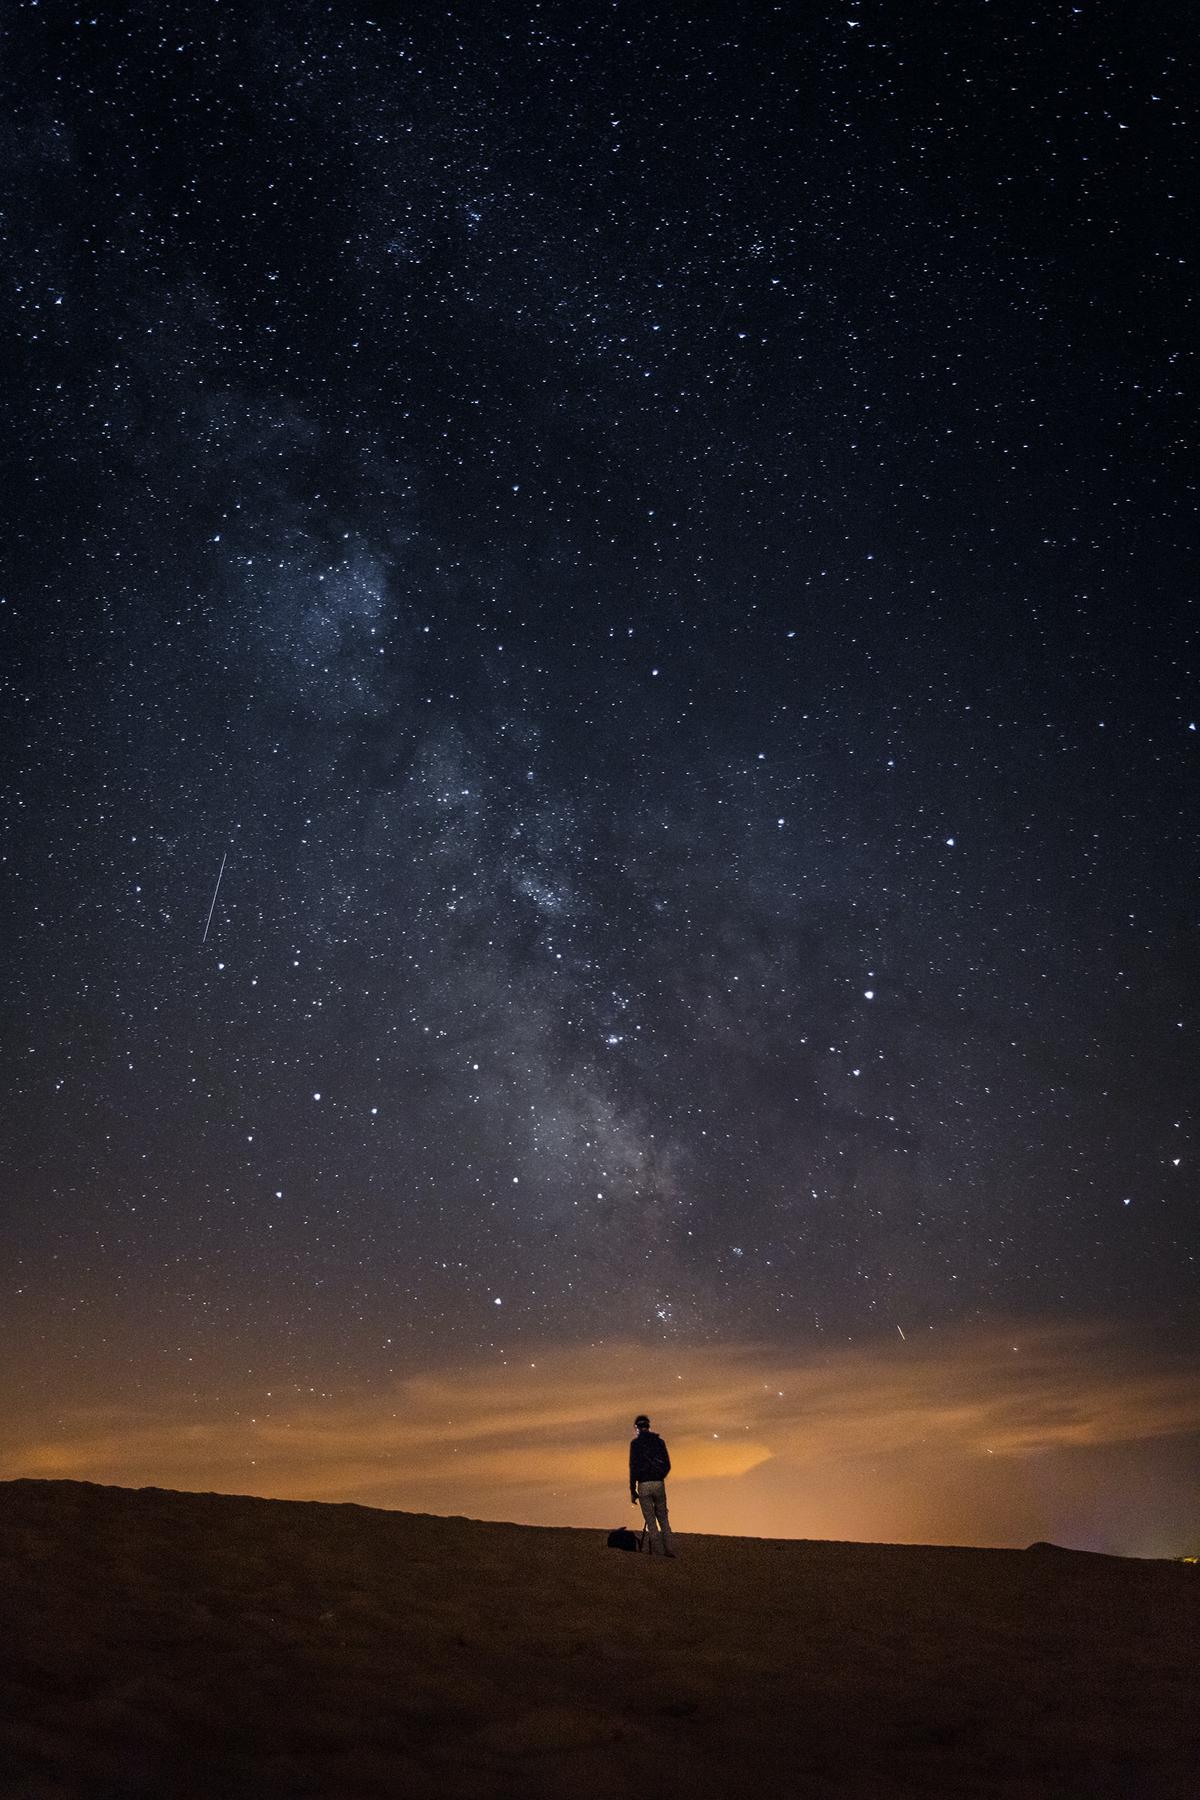 A person pointing a camera towards the night sky with stars and the Milky Way visible in the background.